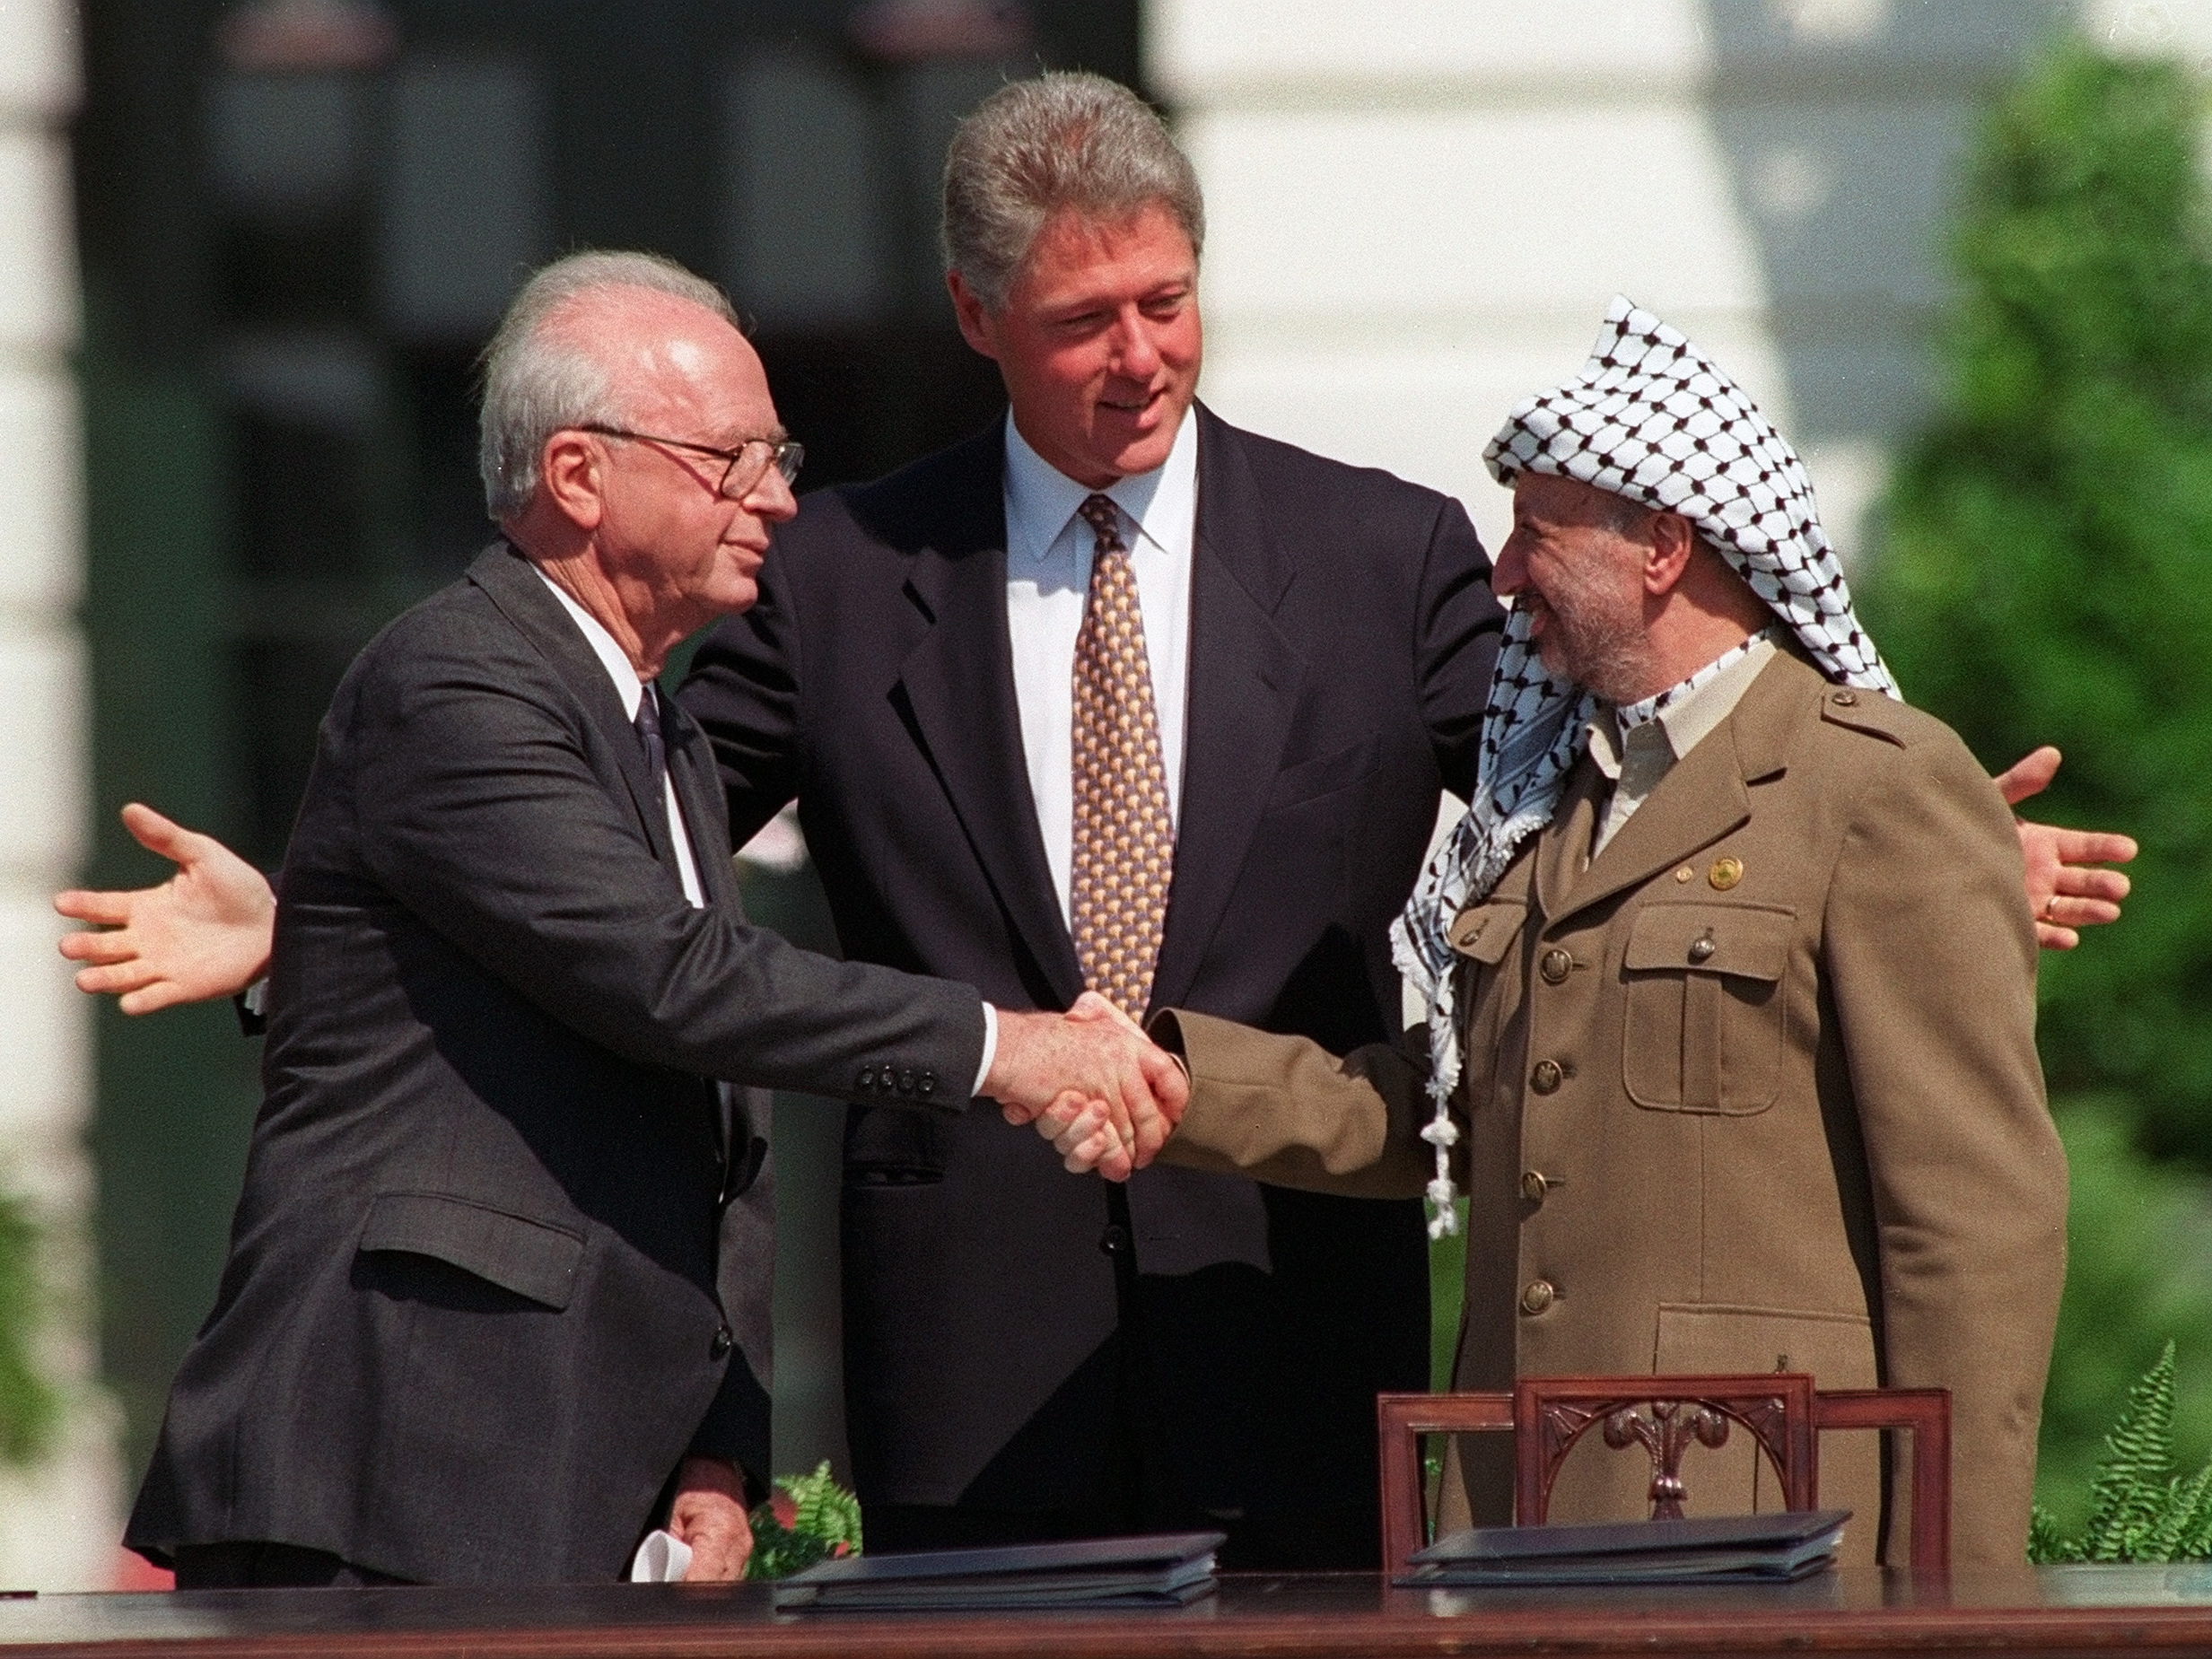 A radical Mideast proposal: What if the U.S. recognized a Palestinian state now?